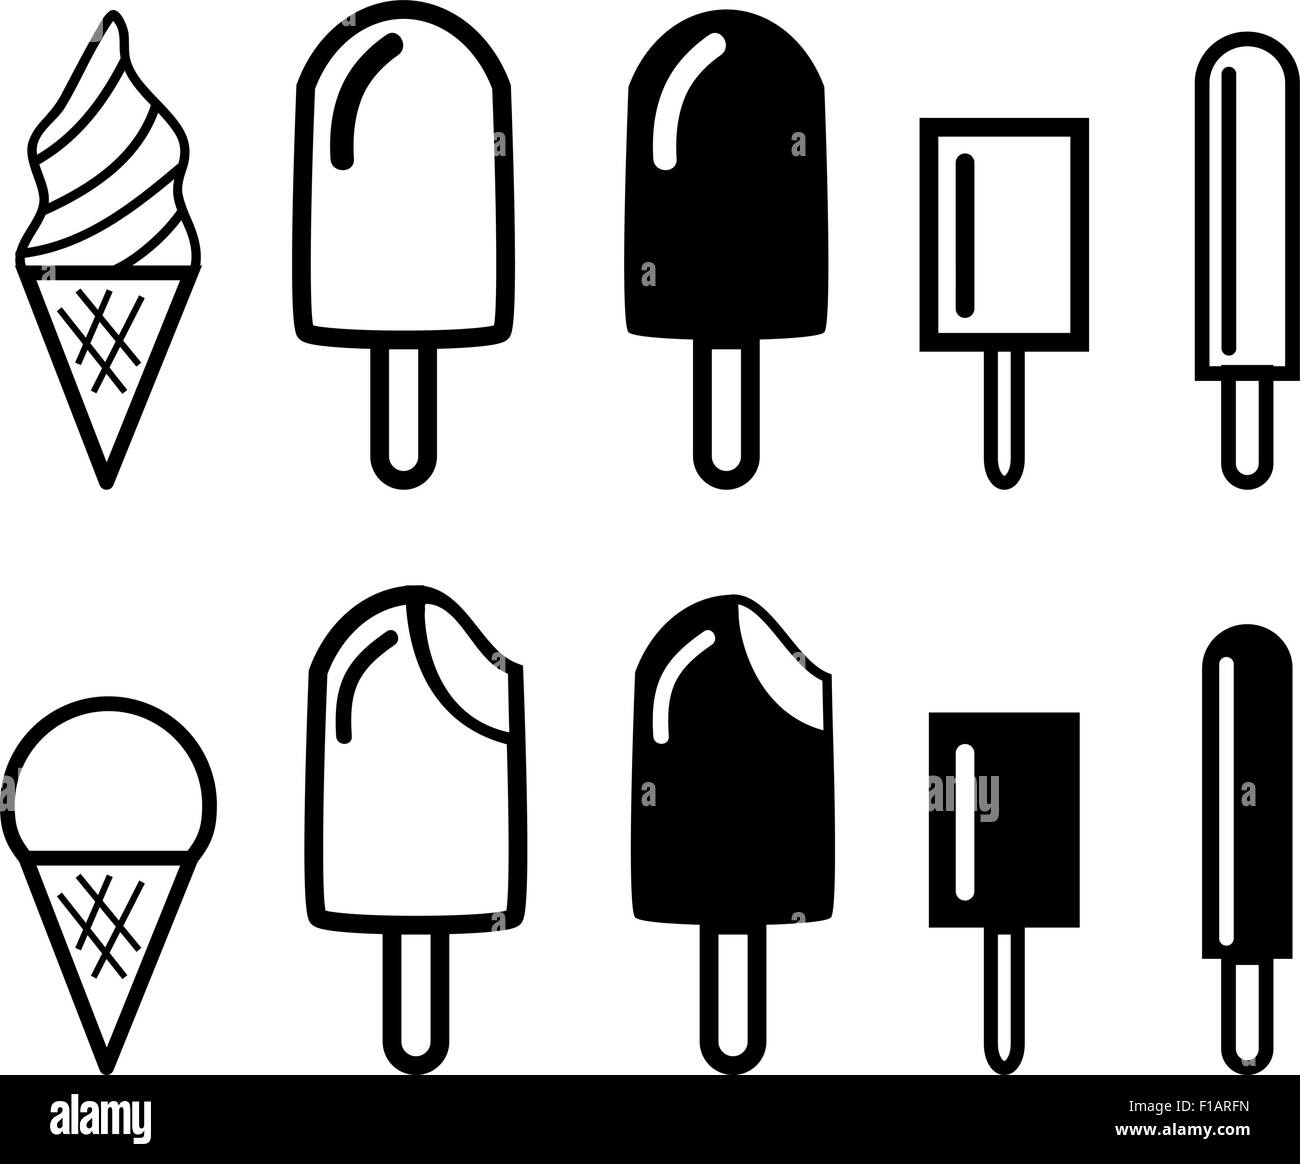 Ice cream icons and symbol. vector illustration Stock Vector